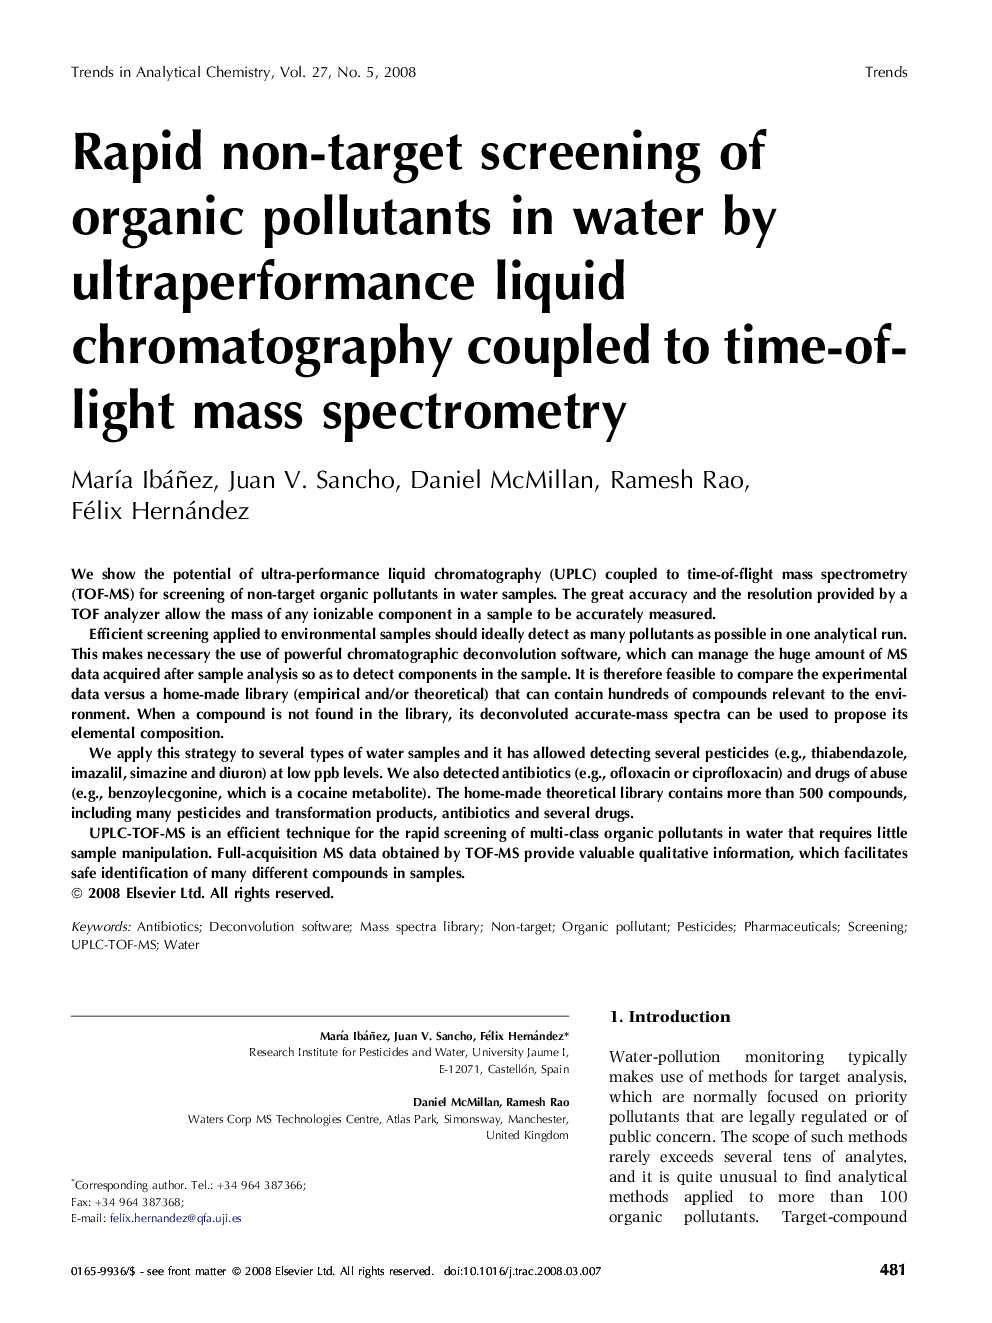 Rapid non-target screening of organic pollutants in water by ultraperformance liquid chromatography coupled to time-of-light mass spectrometry